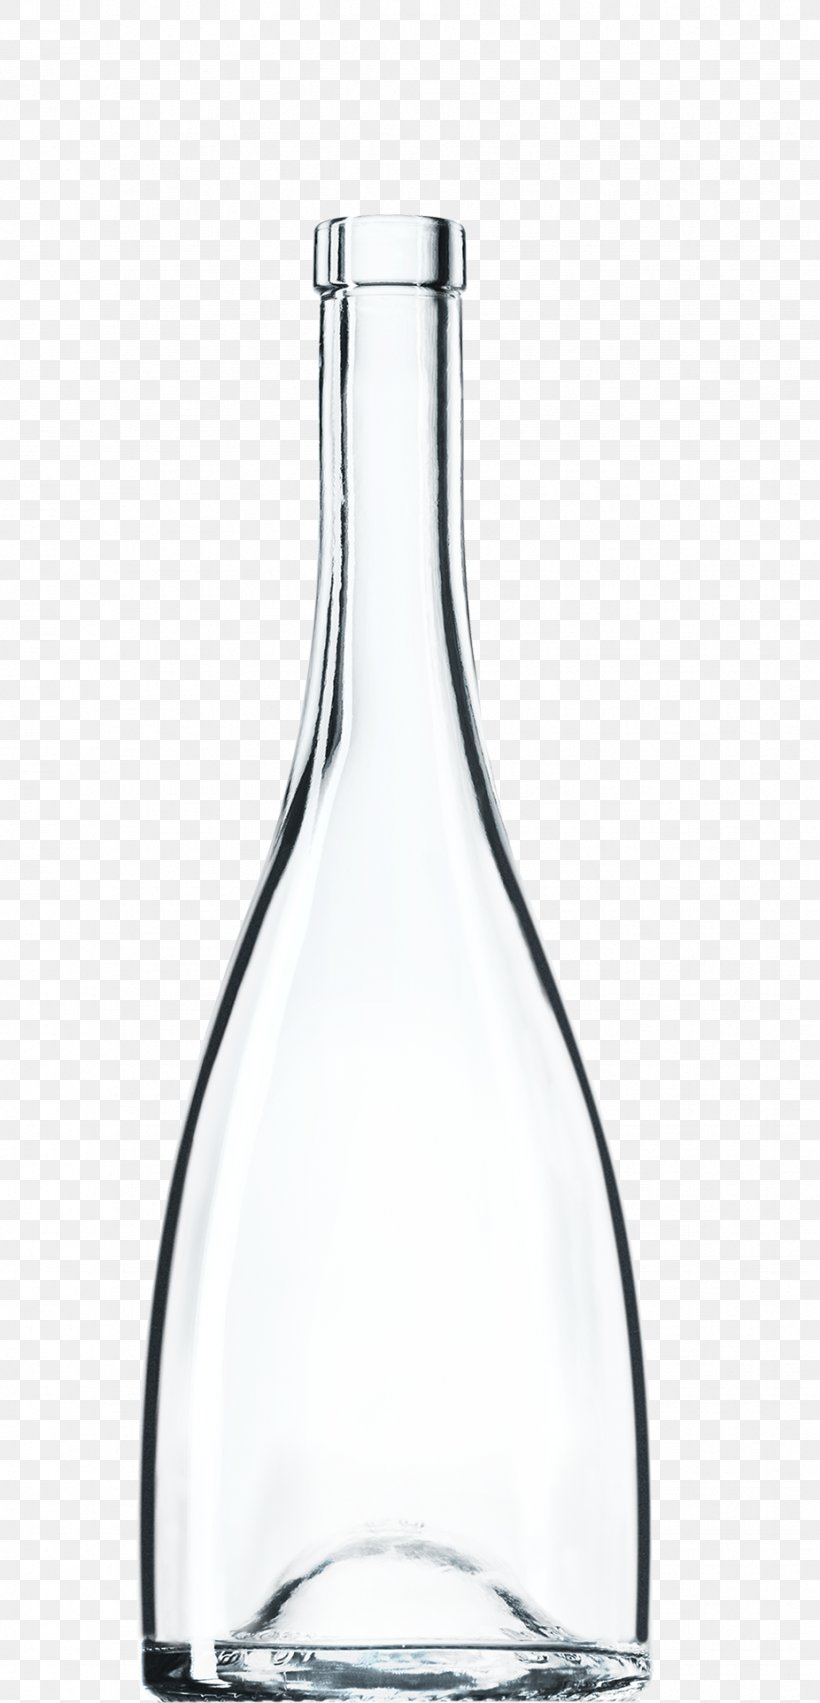 Glass Bottle Decanter Tableware, PNG, 926x1924px, Glass, Barware, Bottle, Decanter, Drinkware Download Free